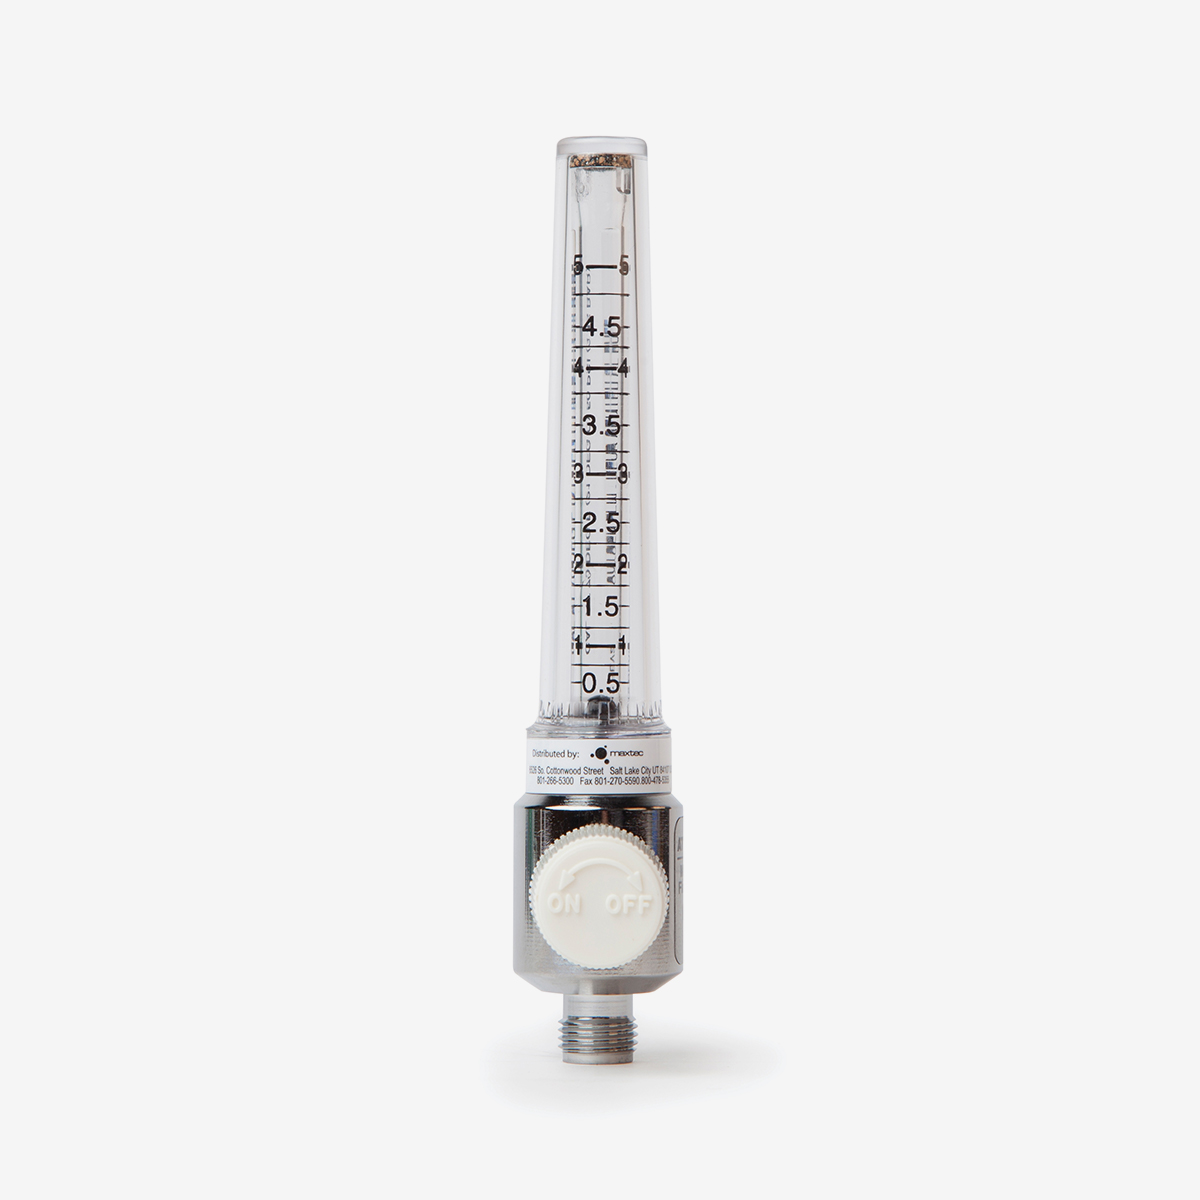 0-5 liters per minute flow meter with white knob